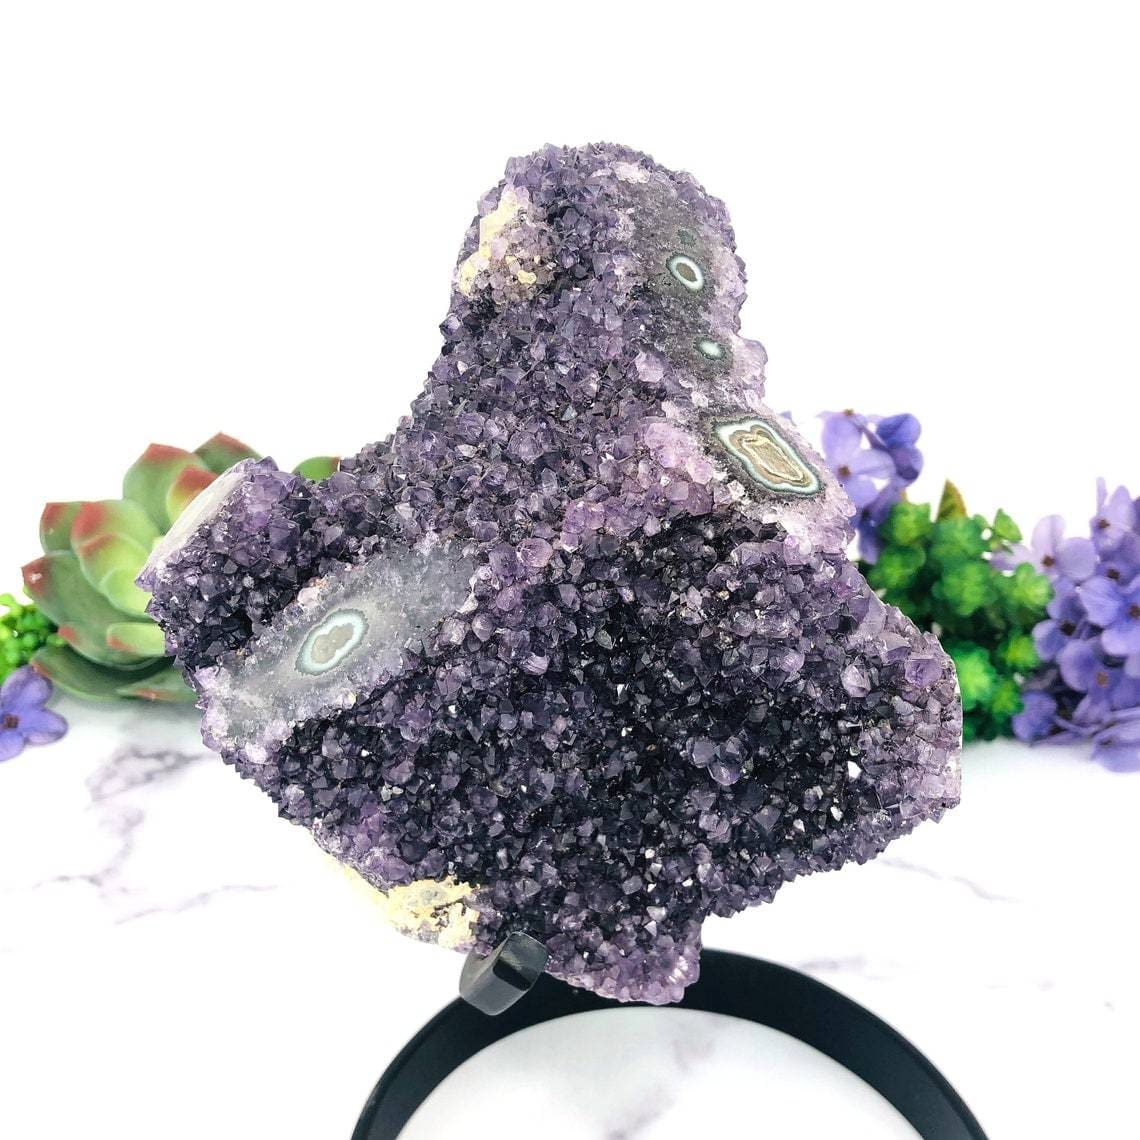 Amethyst Purple Geode Crystal With Stalactite on Metal Stand with decorations in the background